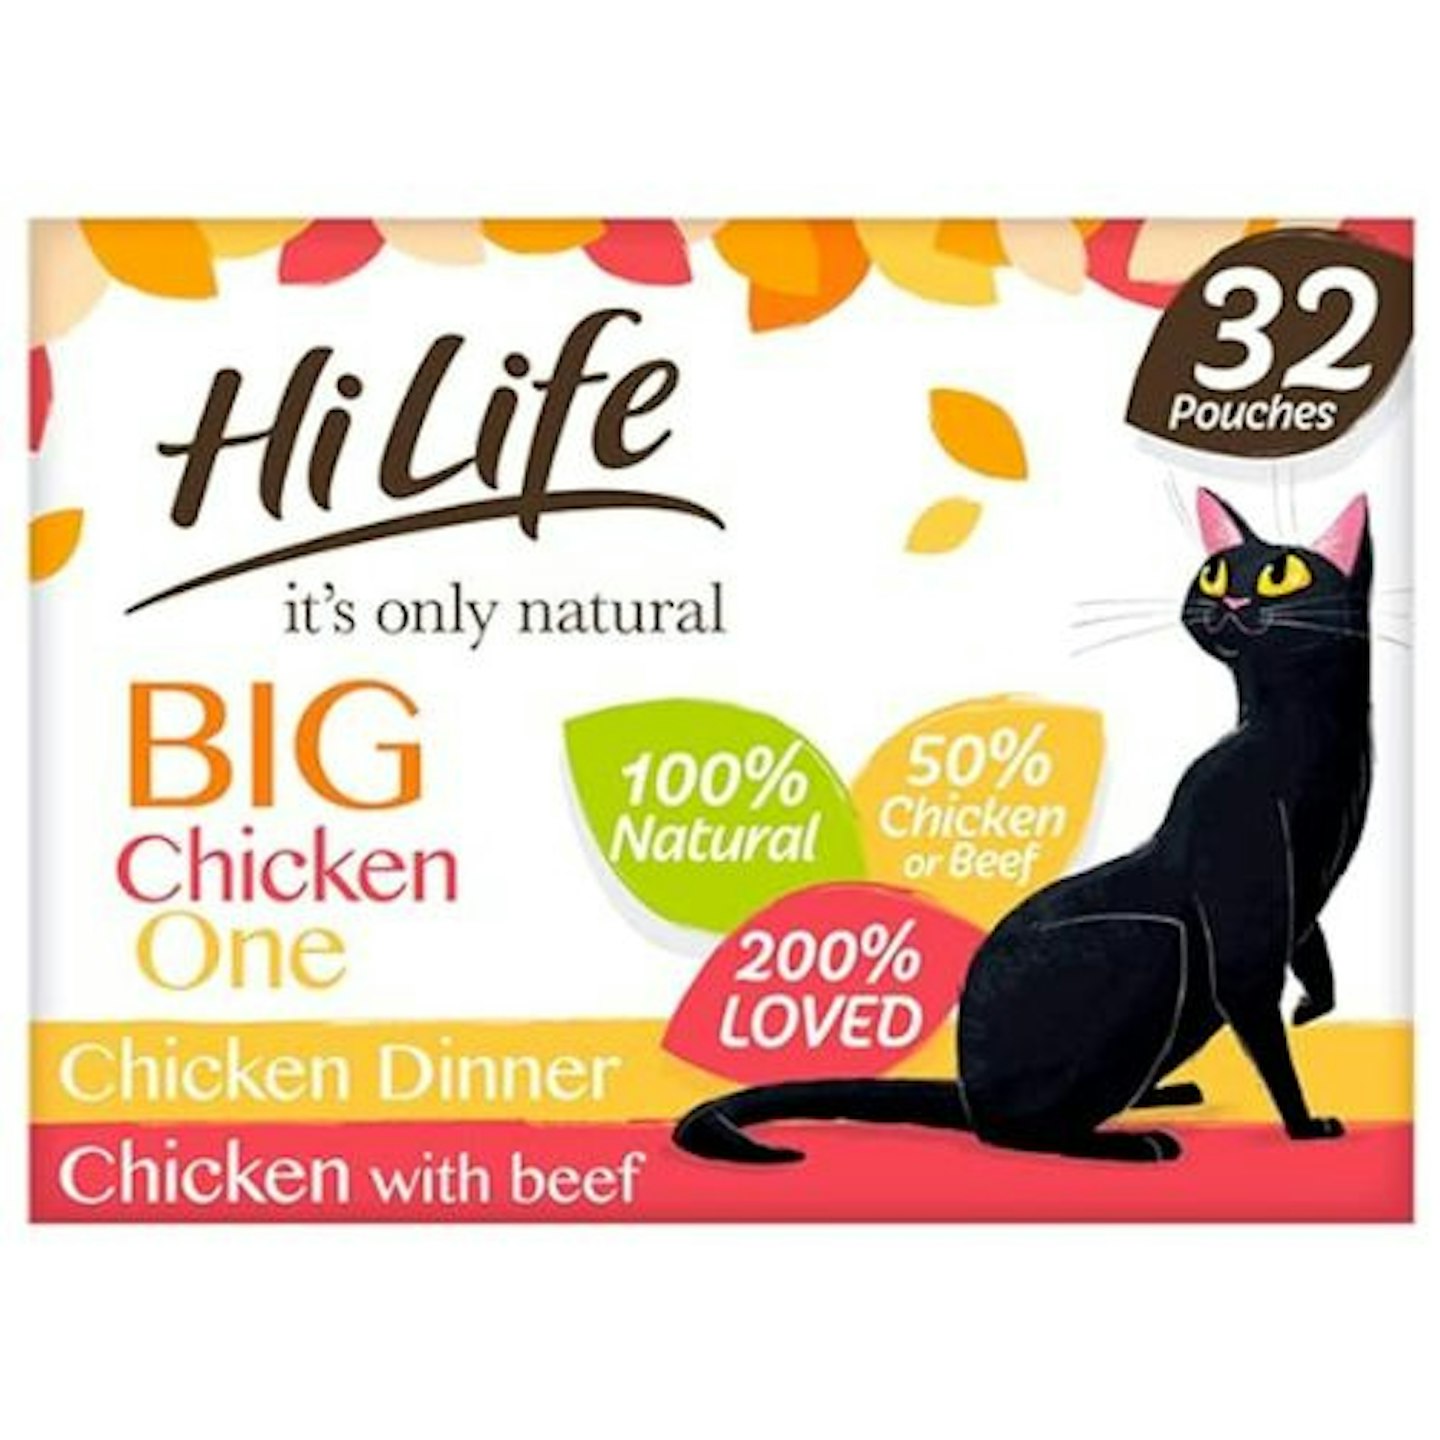 HiLife it's only natural Big Chicken One